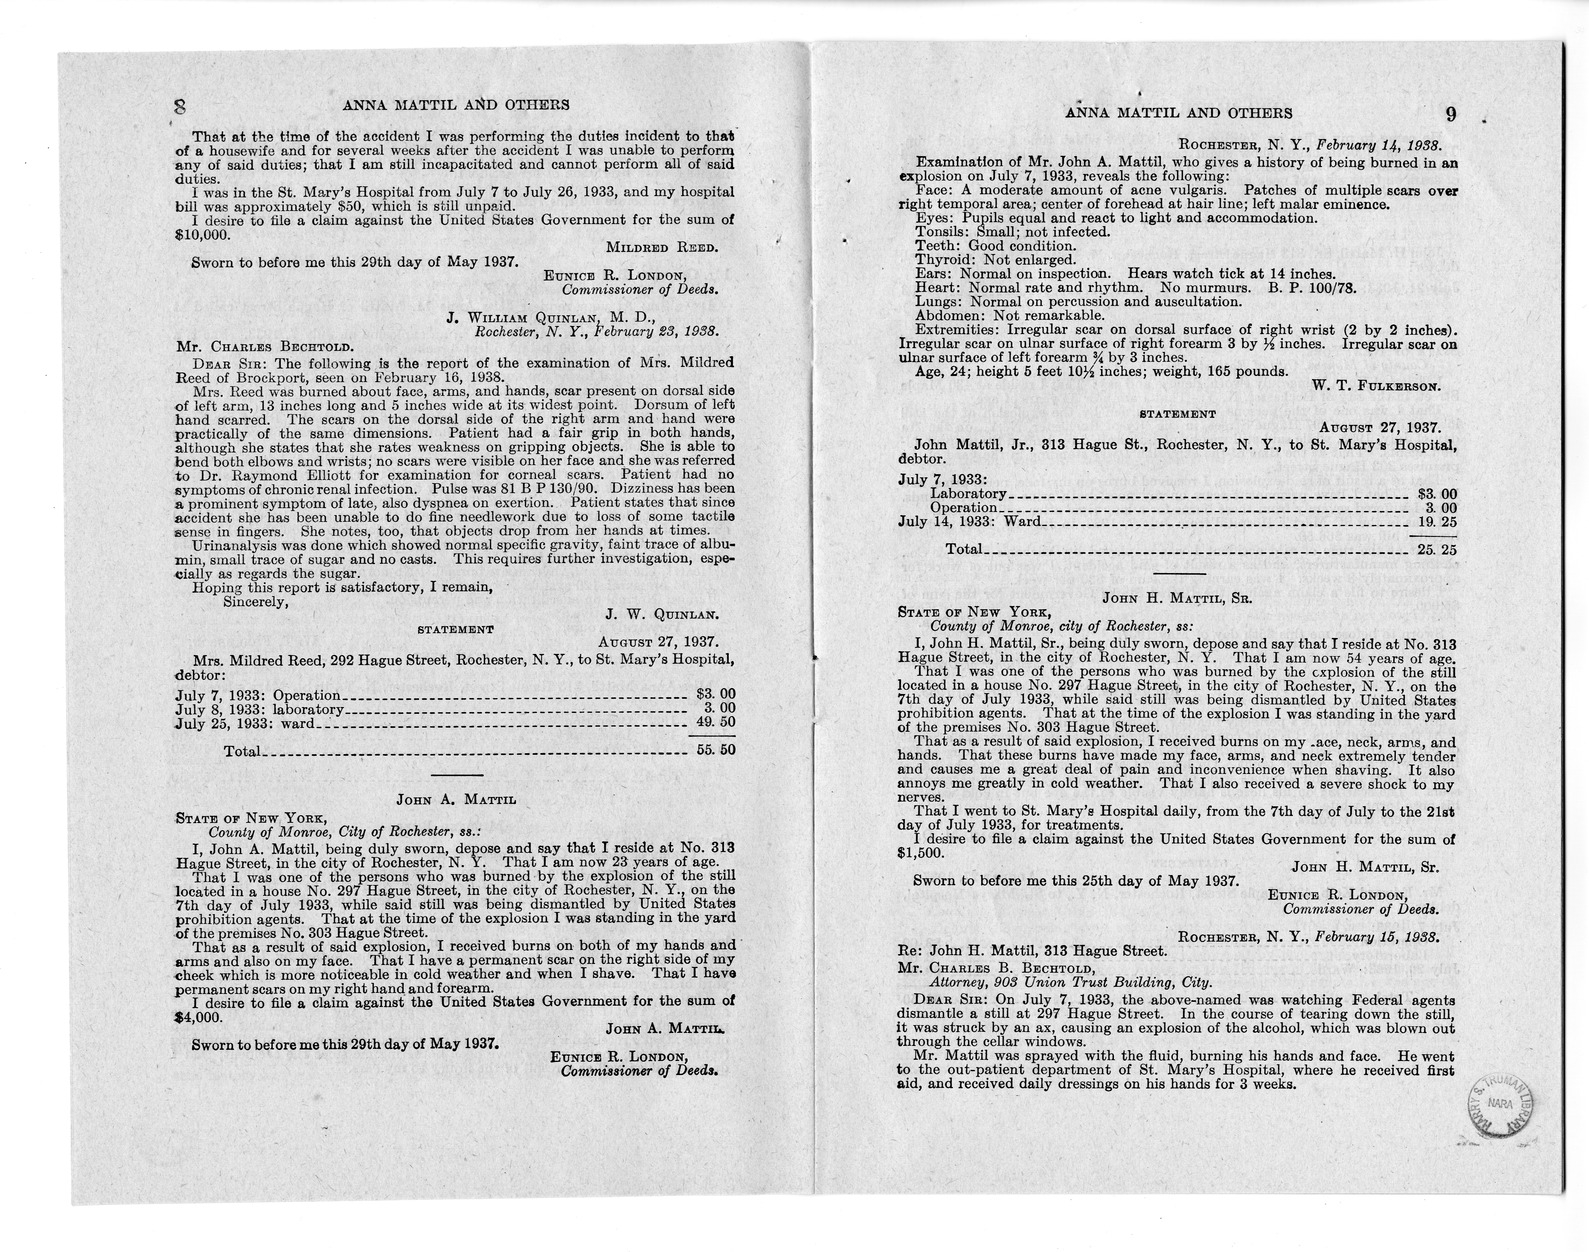 Memorandum from Frederick J. Bailey to M. C. Latta, H.R. 1889, For the Relief of Anna Mattil and Others, with Attachments